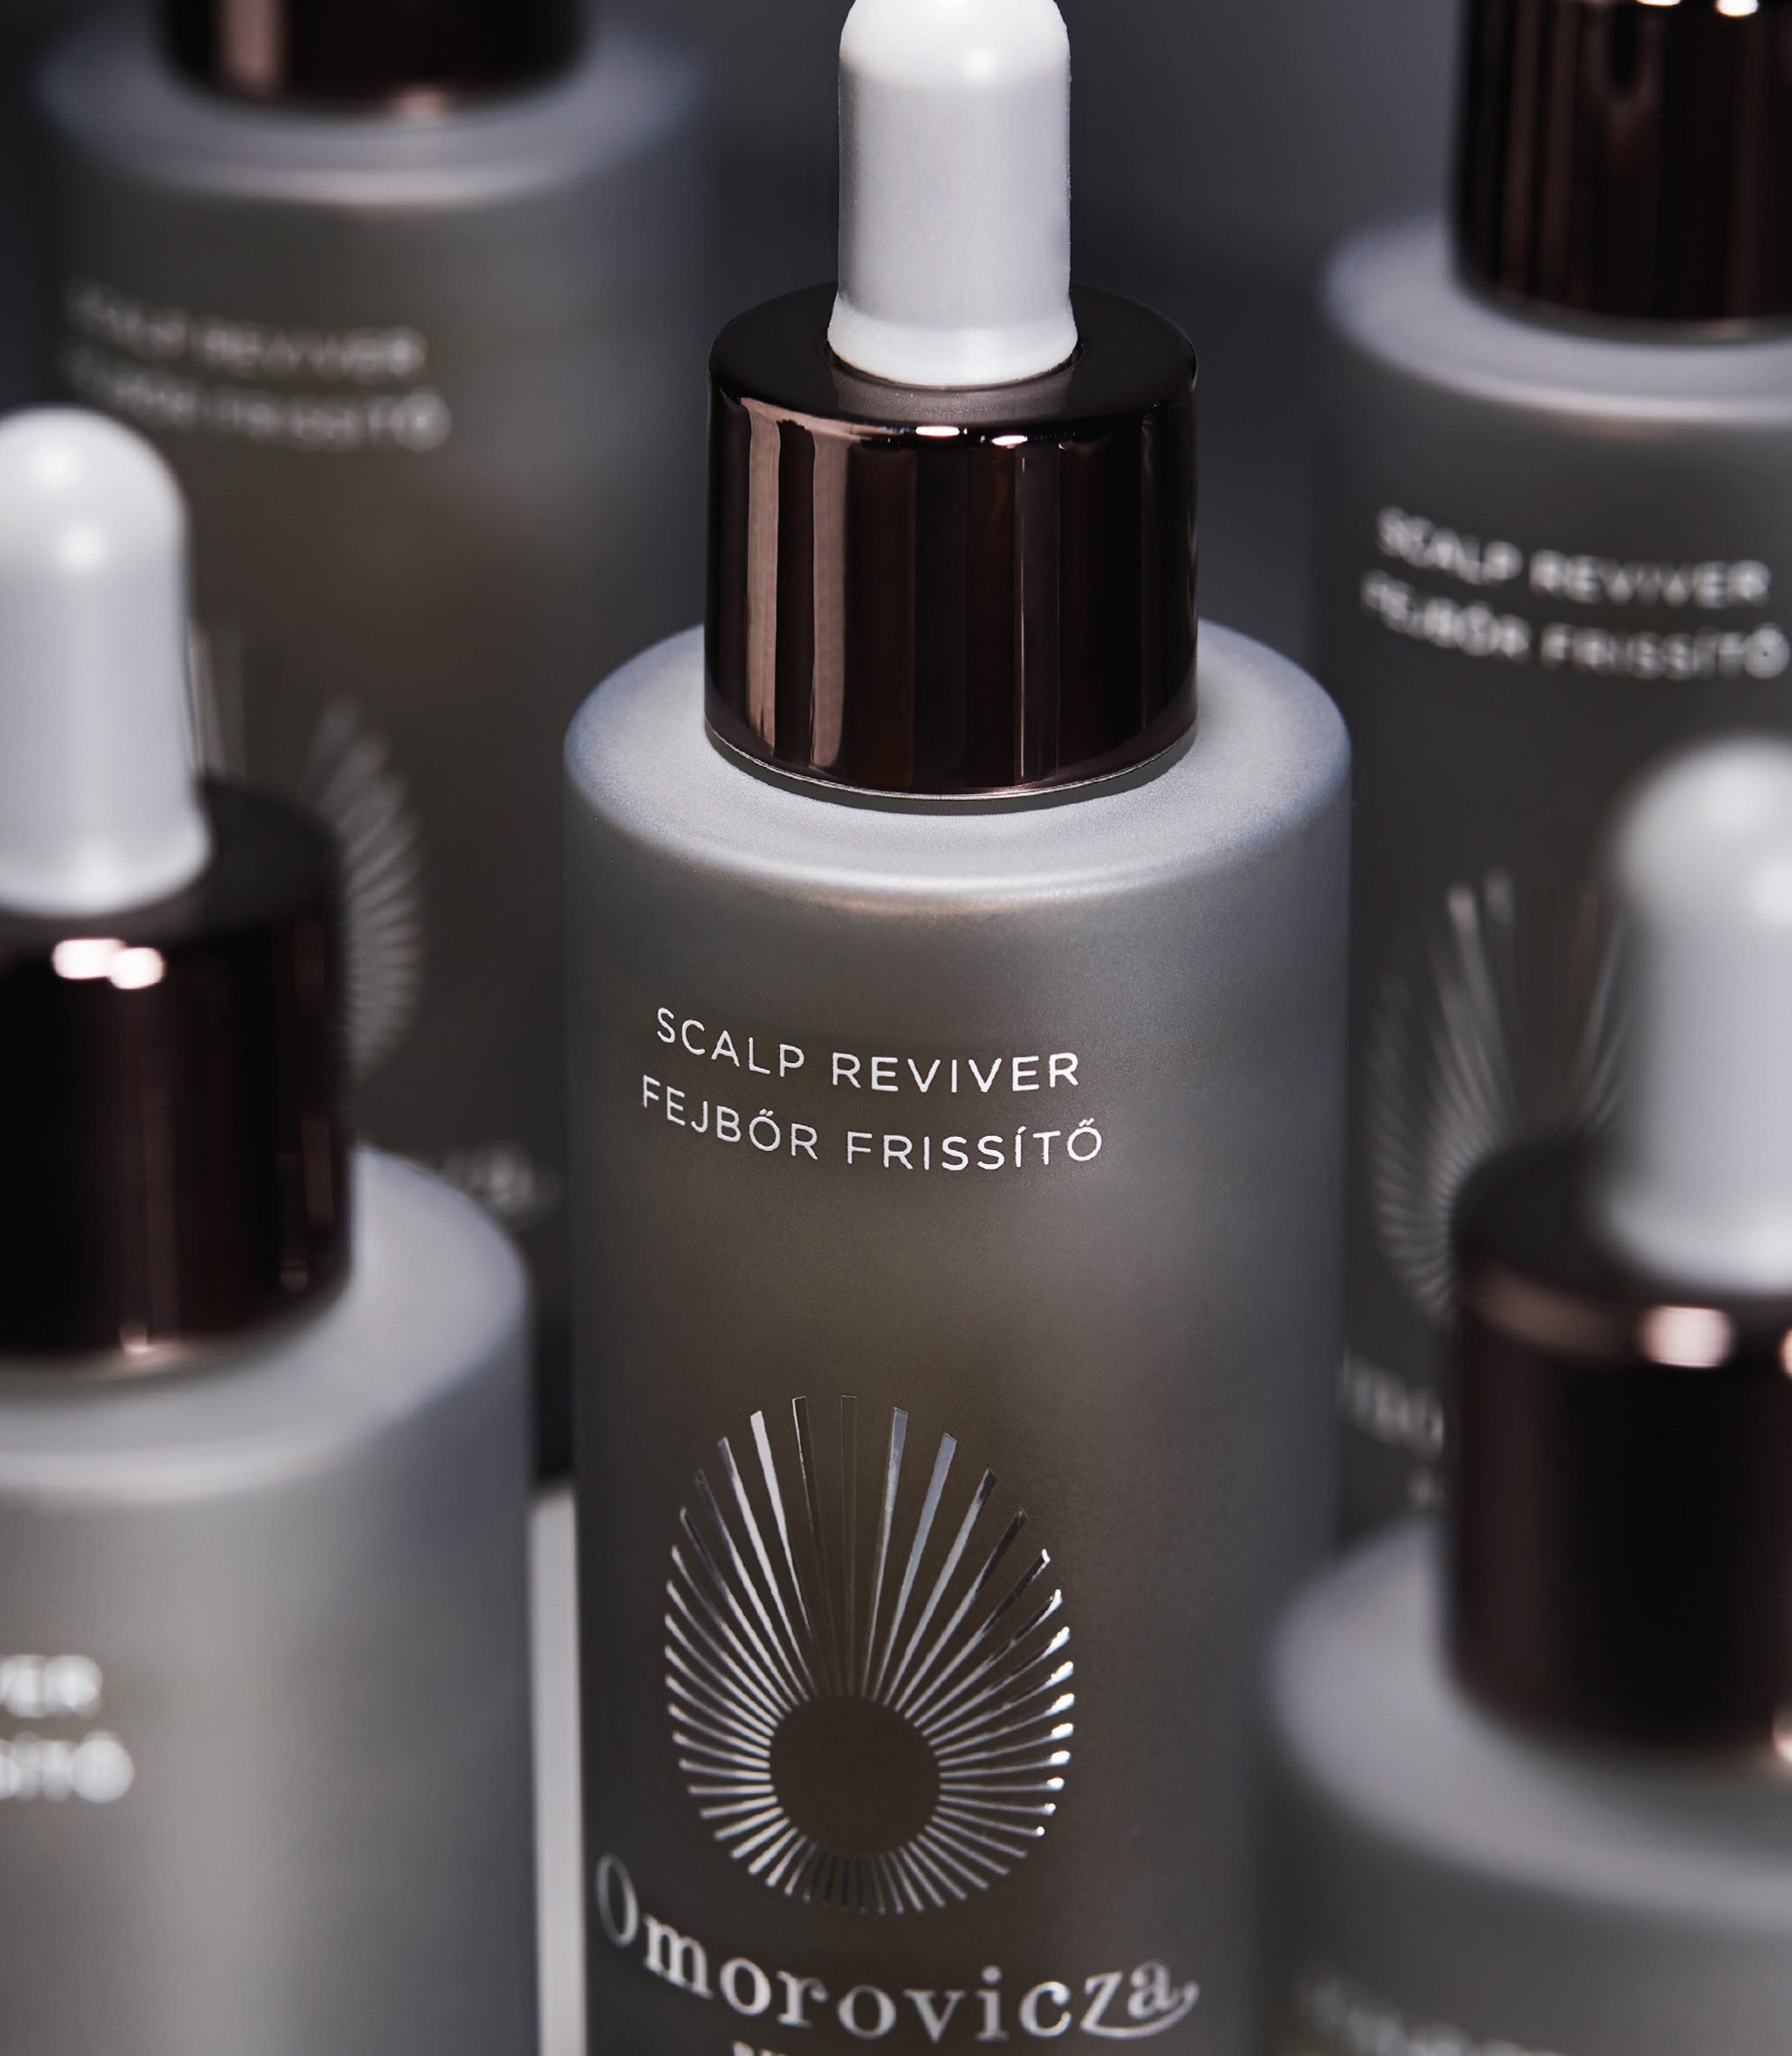 A close up shot of Scalp Reviver surrounded by other bottles of Scalp Reviver.